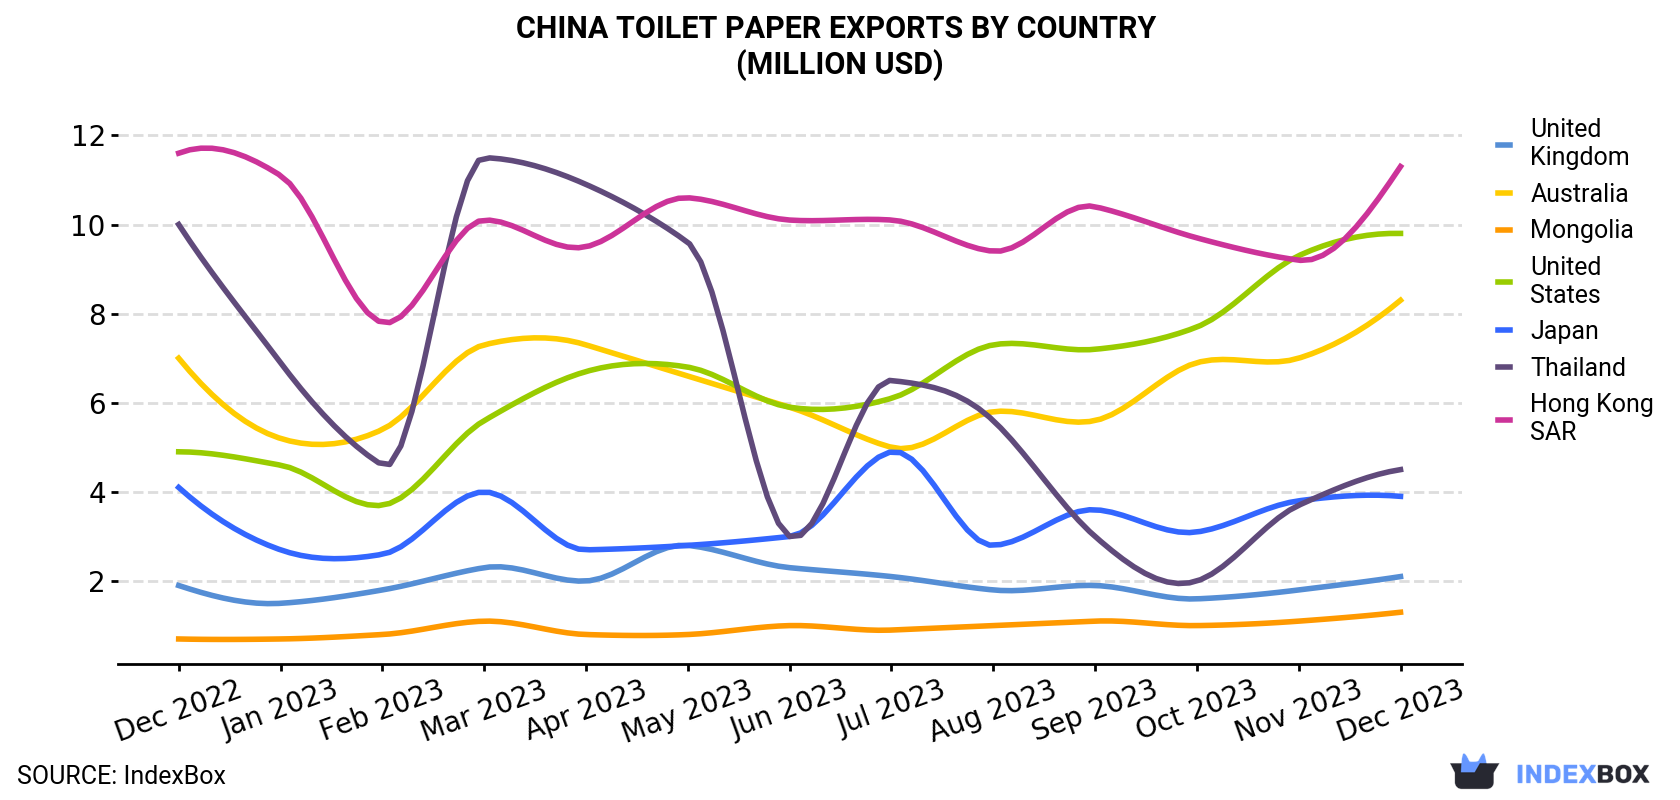 China Toilet Paper Exports By Country (Million USD)